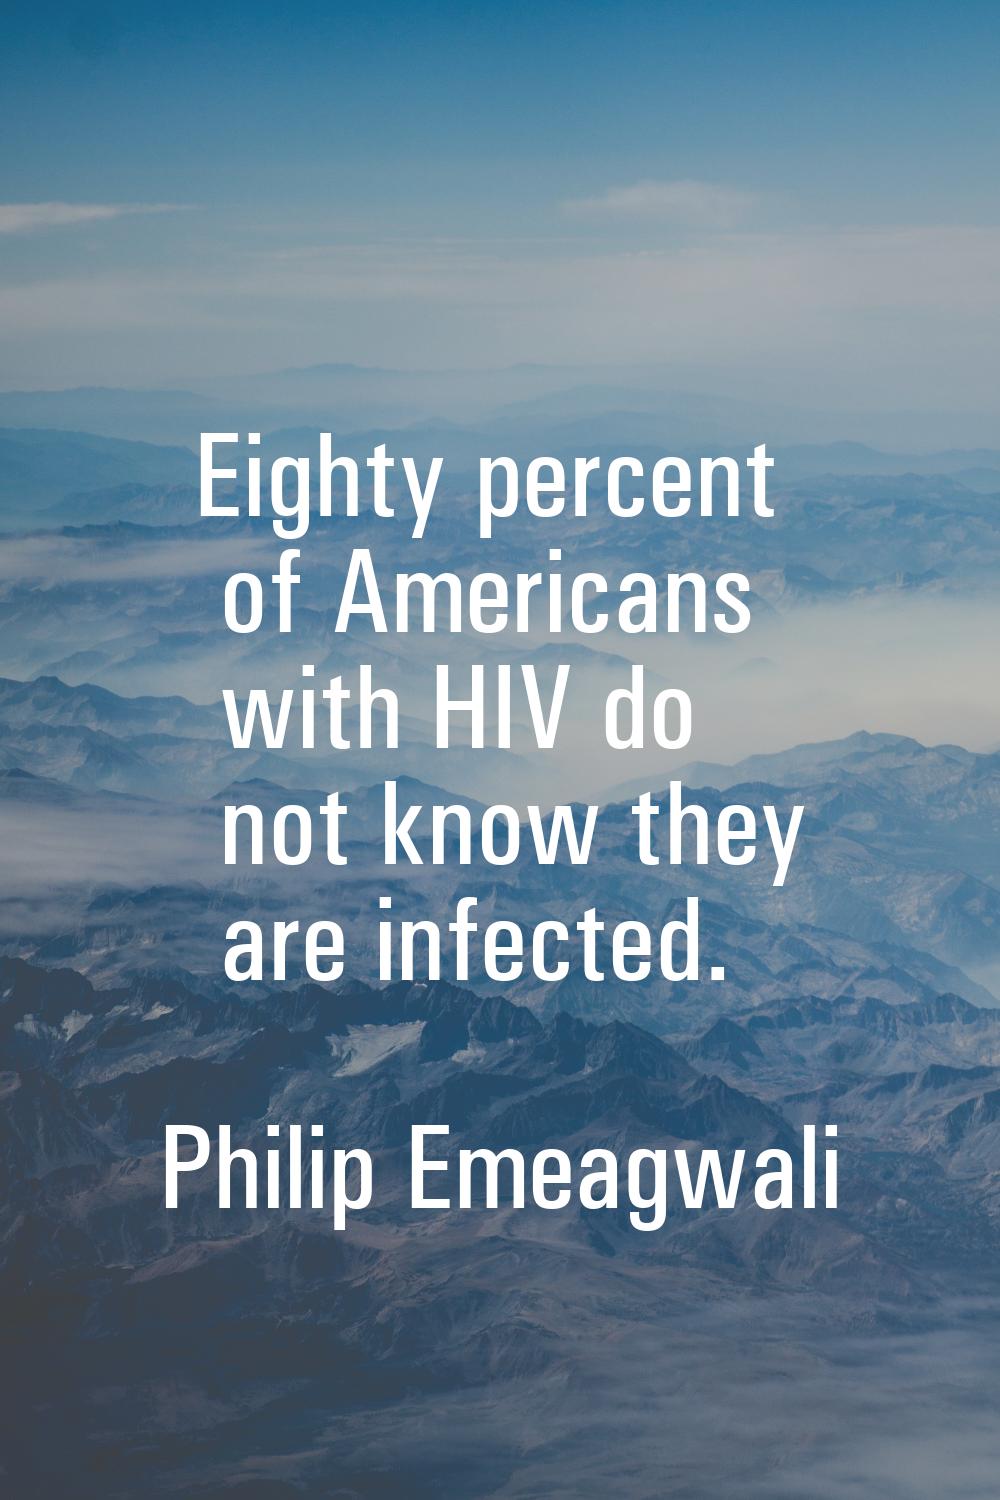 Eighty percent of Americans with HIV do not know they are infected.